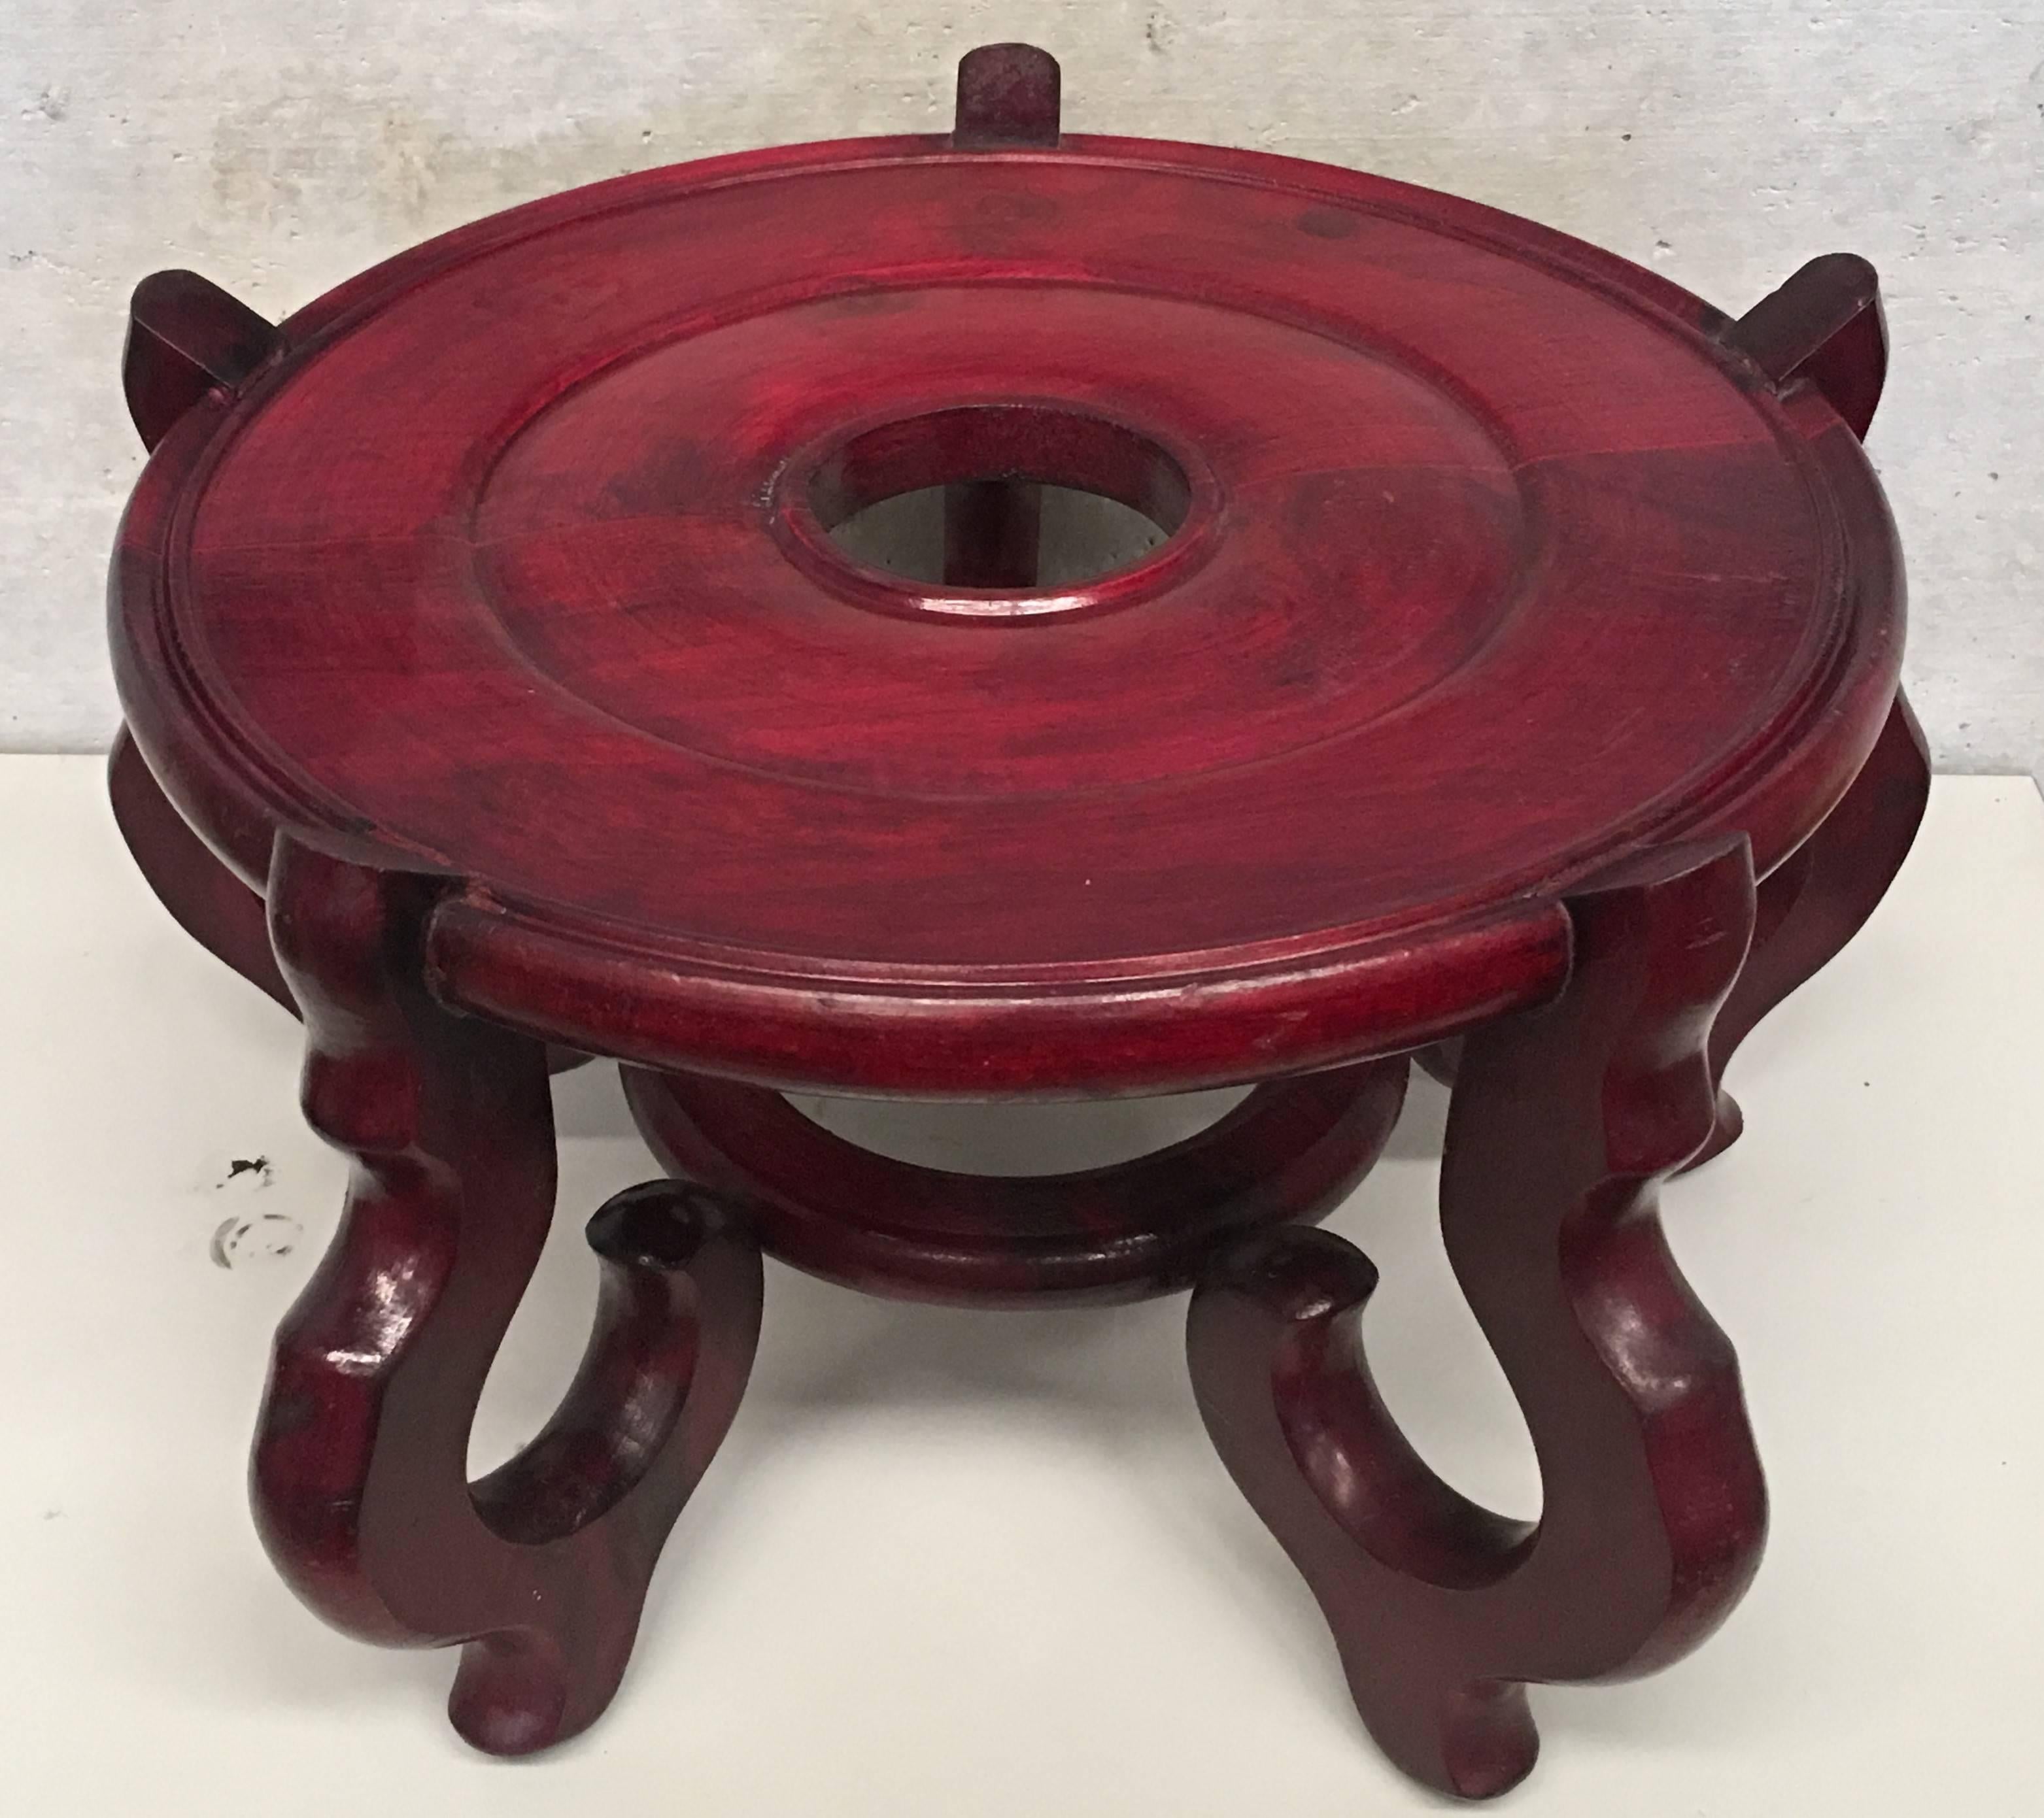 Early 19th century New England carved mahogany planter or vase stand.